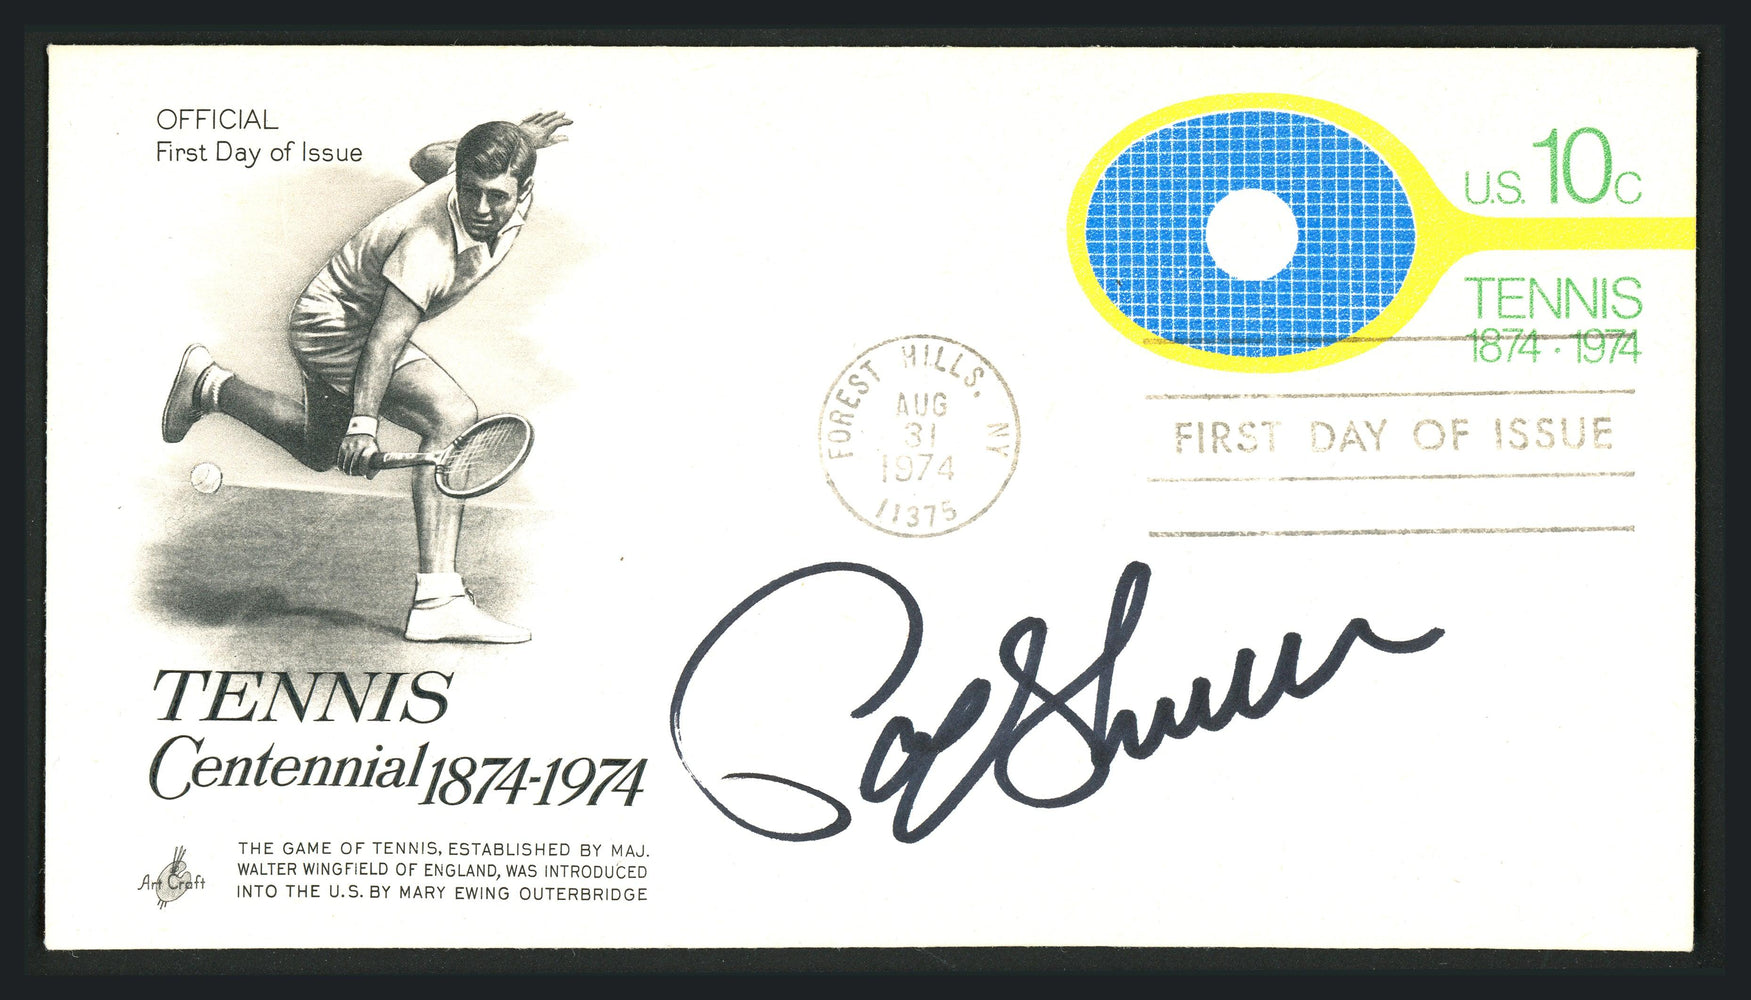 Pam Shriver Autographed First Day Cover Tennis SKU #164925 - RSA